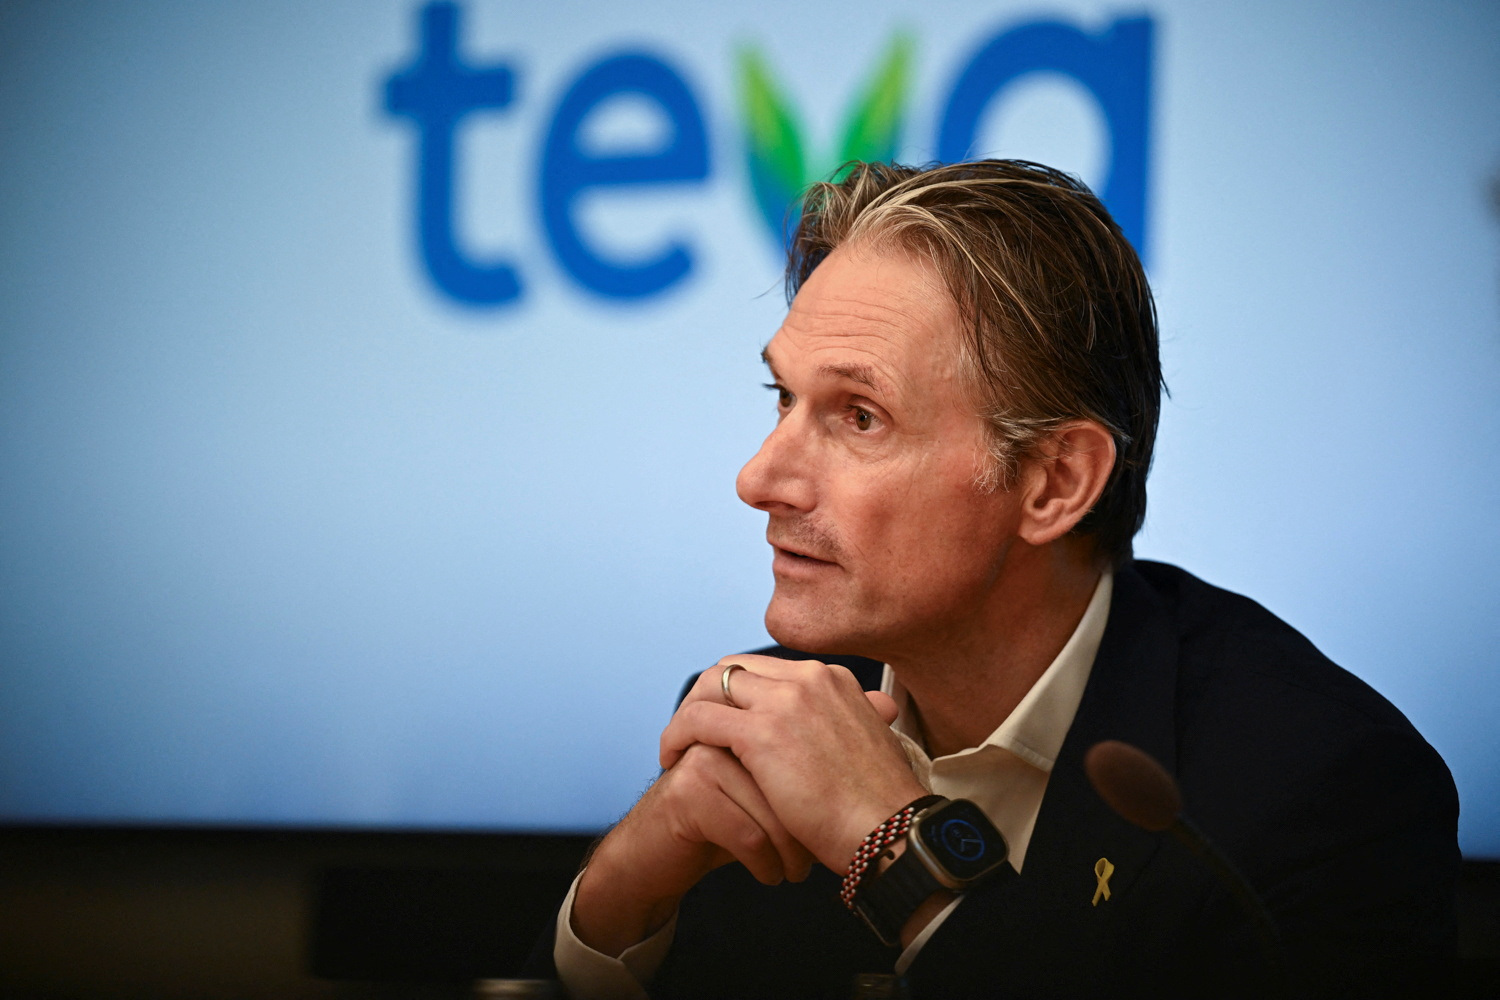 Richard Francis, Chief Executive of Teva Pharmaceutical Industries, looks on during a press conference at the company headquarters in Tel Aviv